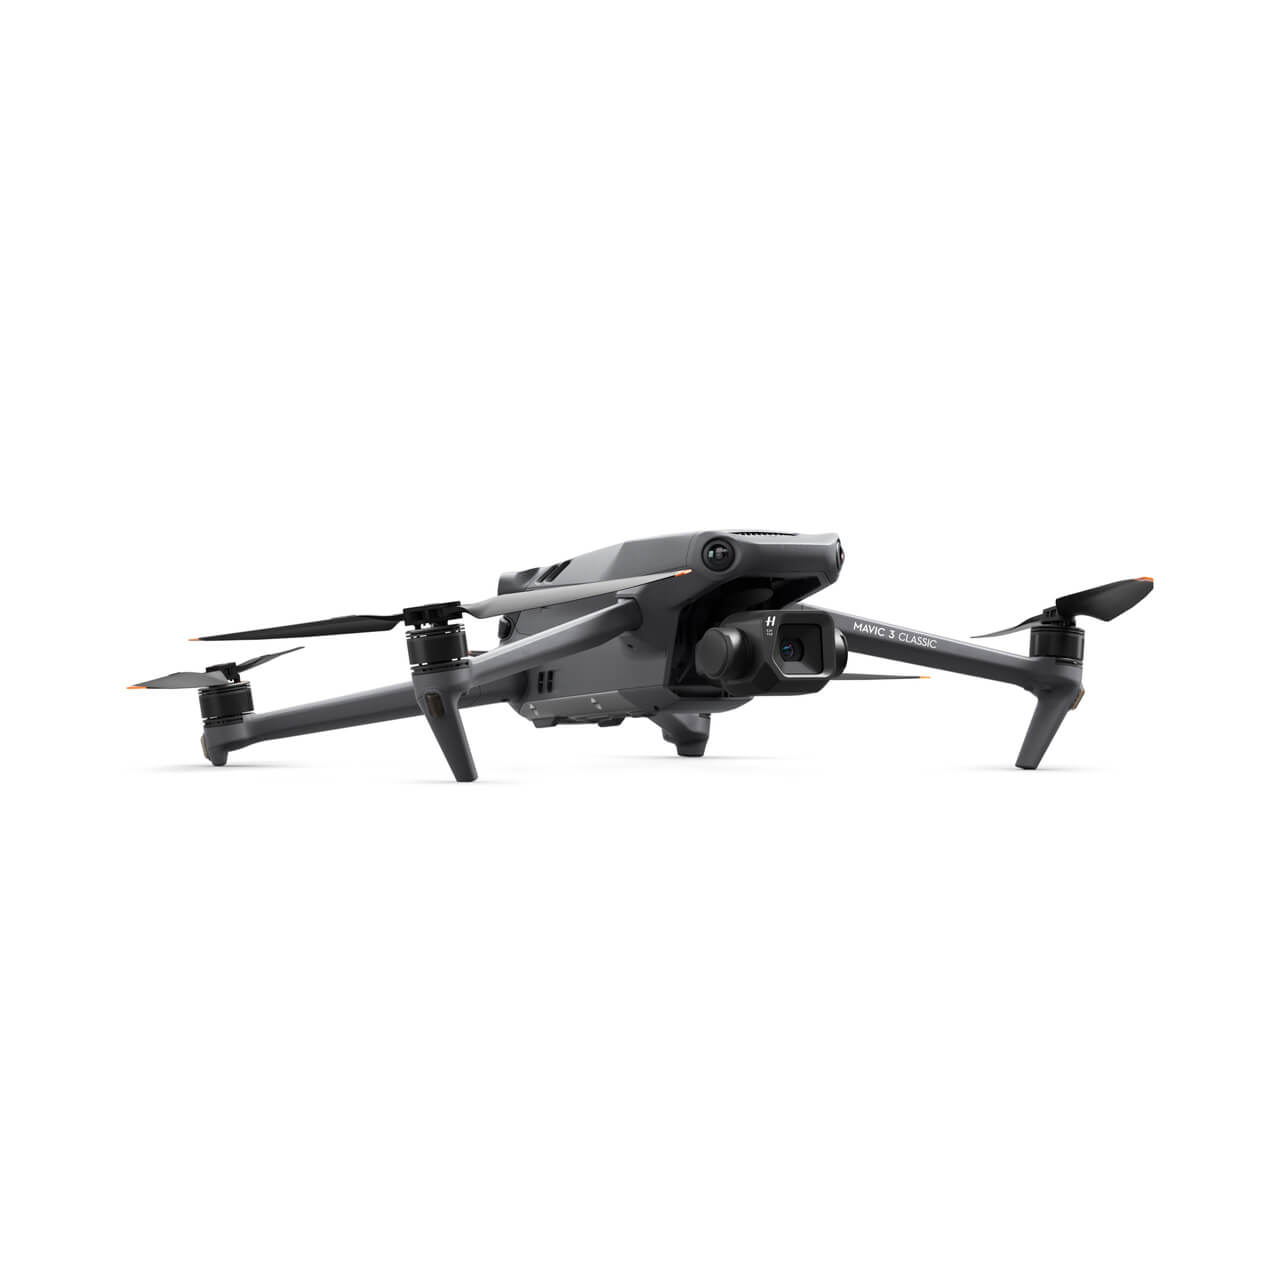 20 MP DJI FPV Drone with Fly More Combo Kit and Motion Controller, Video  Resolution: 4K at Rs 125000 in New Delhi